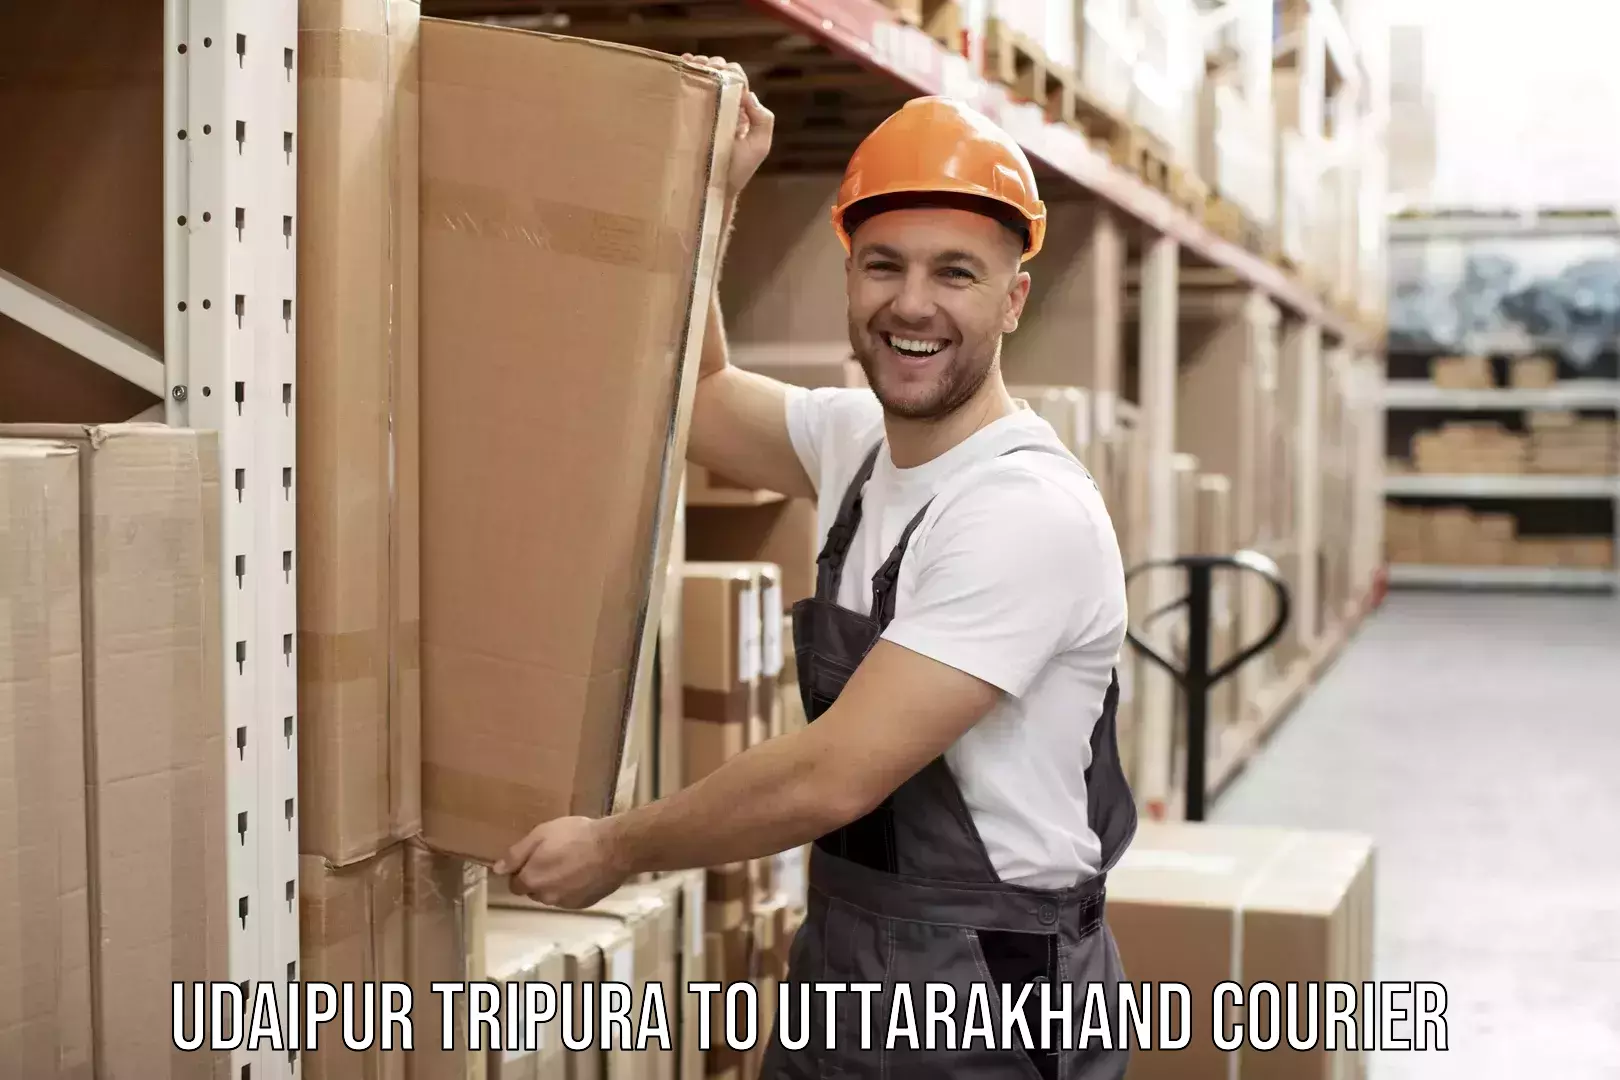 Professional movers and packers Udaipur Tripura to Rudraprayag